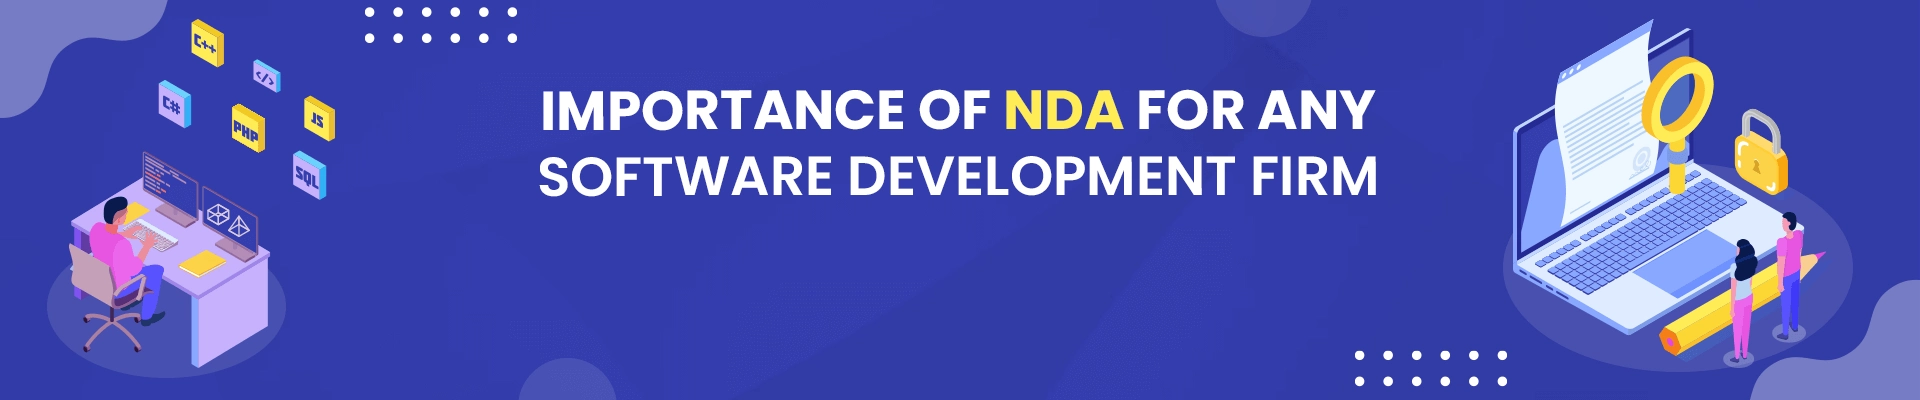 Important Of NDA For Any Software Development Firm